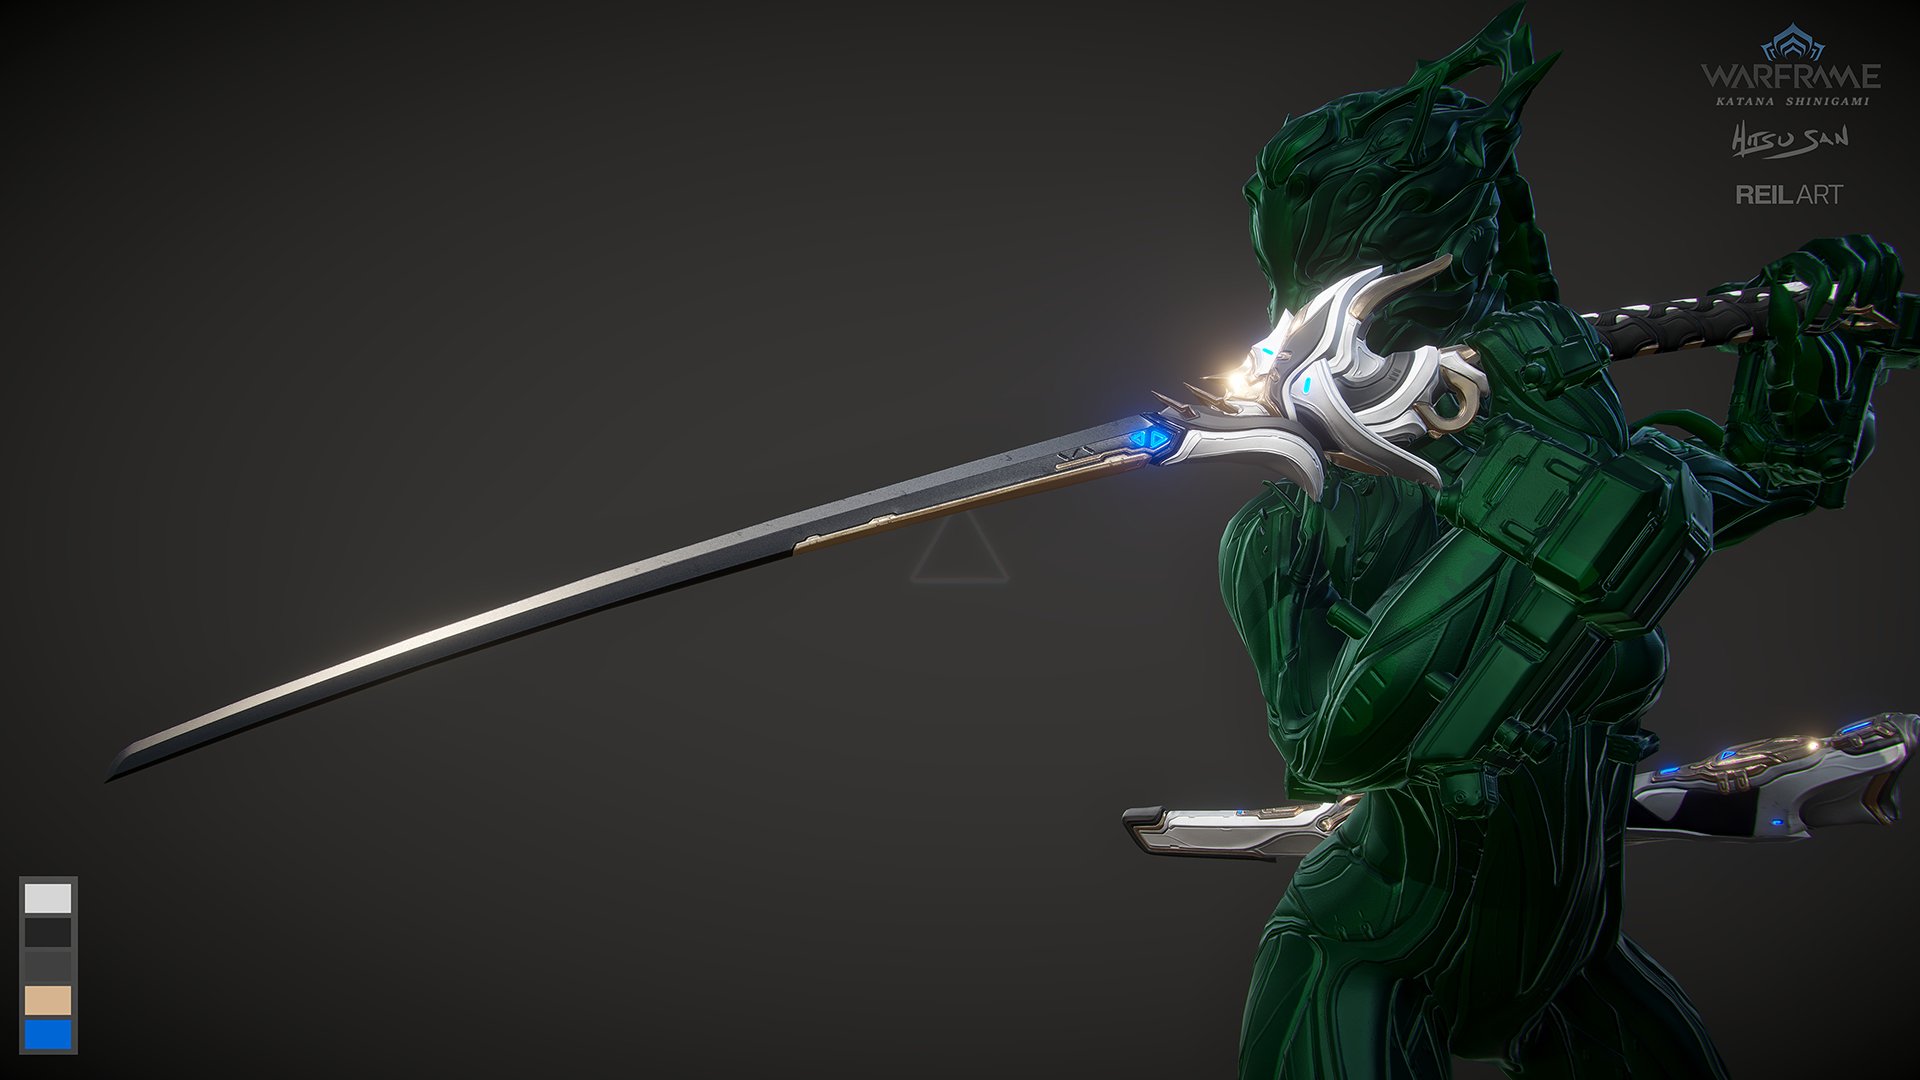 “We've made some changes to the Shinigami Katana #tennogen #Warfra...